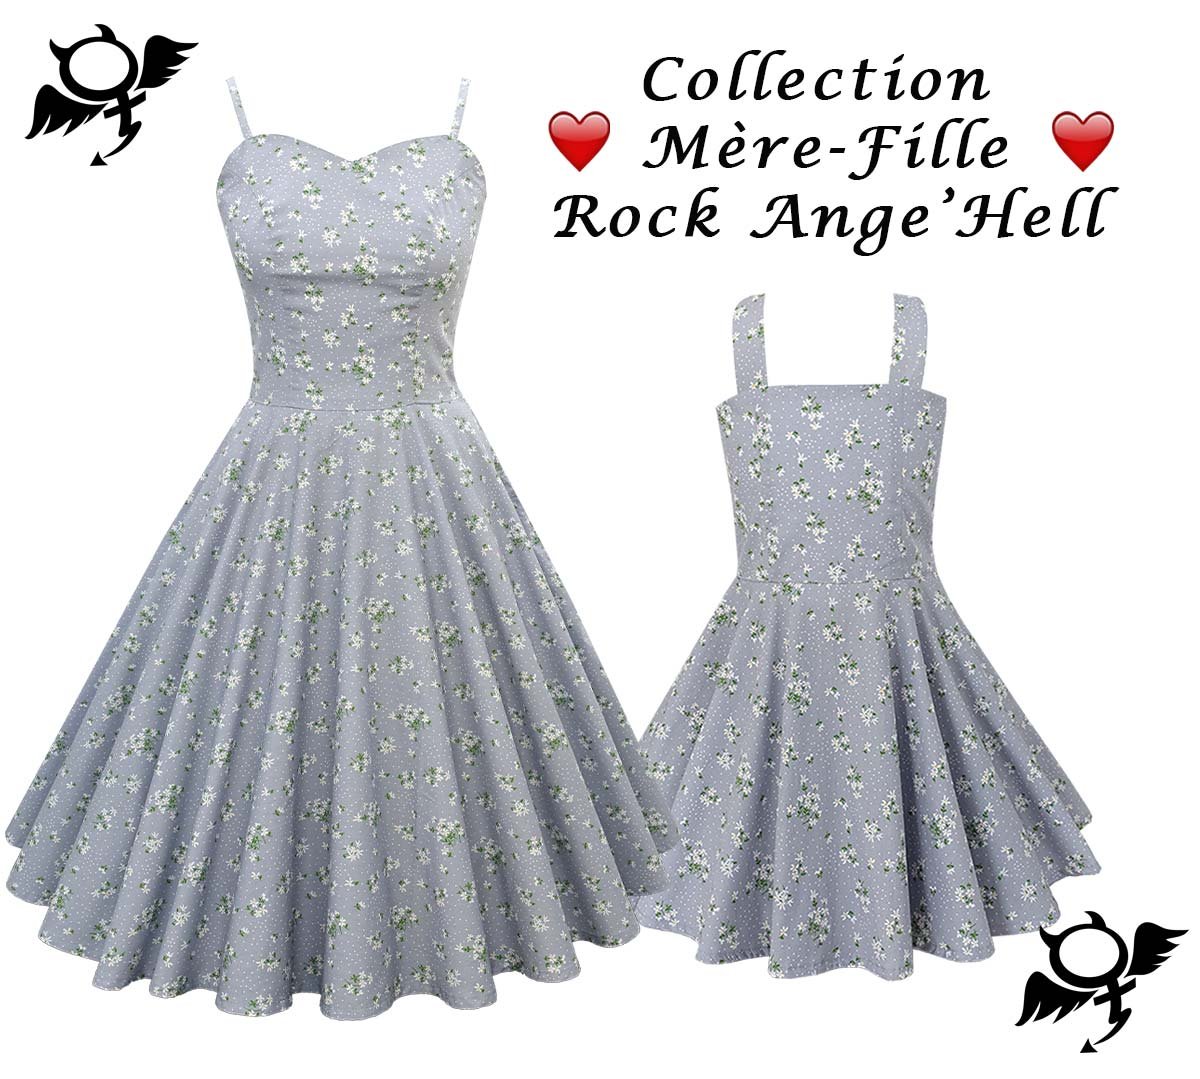 Collection-Rock-AngeHell-Mere-Fille34.jpg